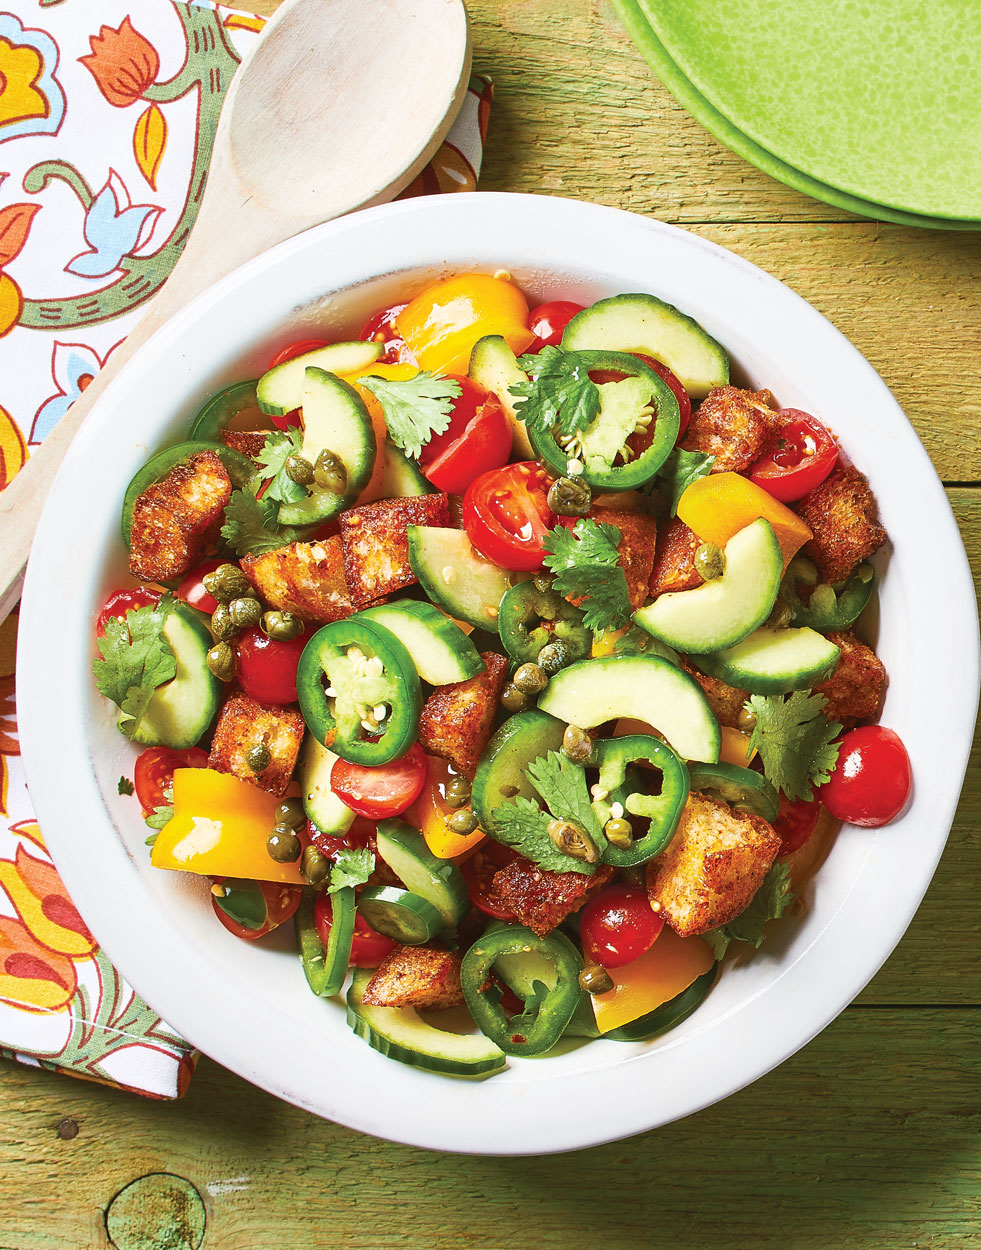 Portuguese Vegetable Salad with Smoked Paprika Croutons